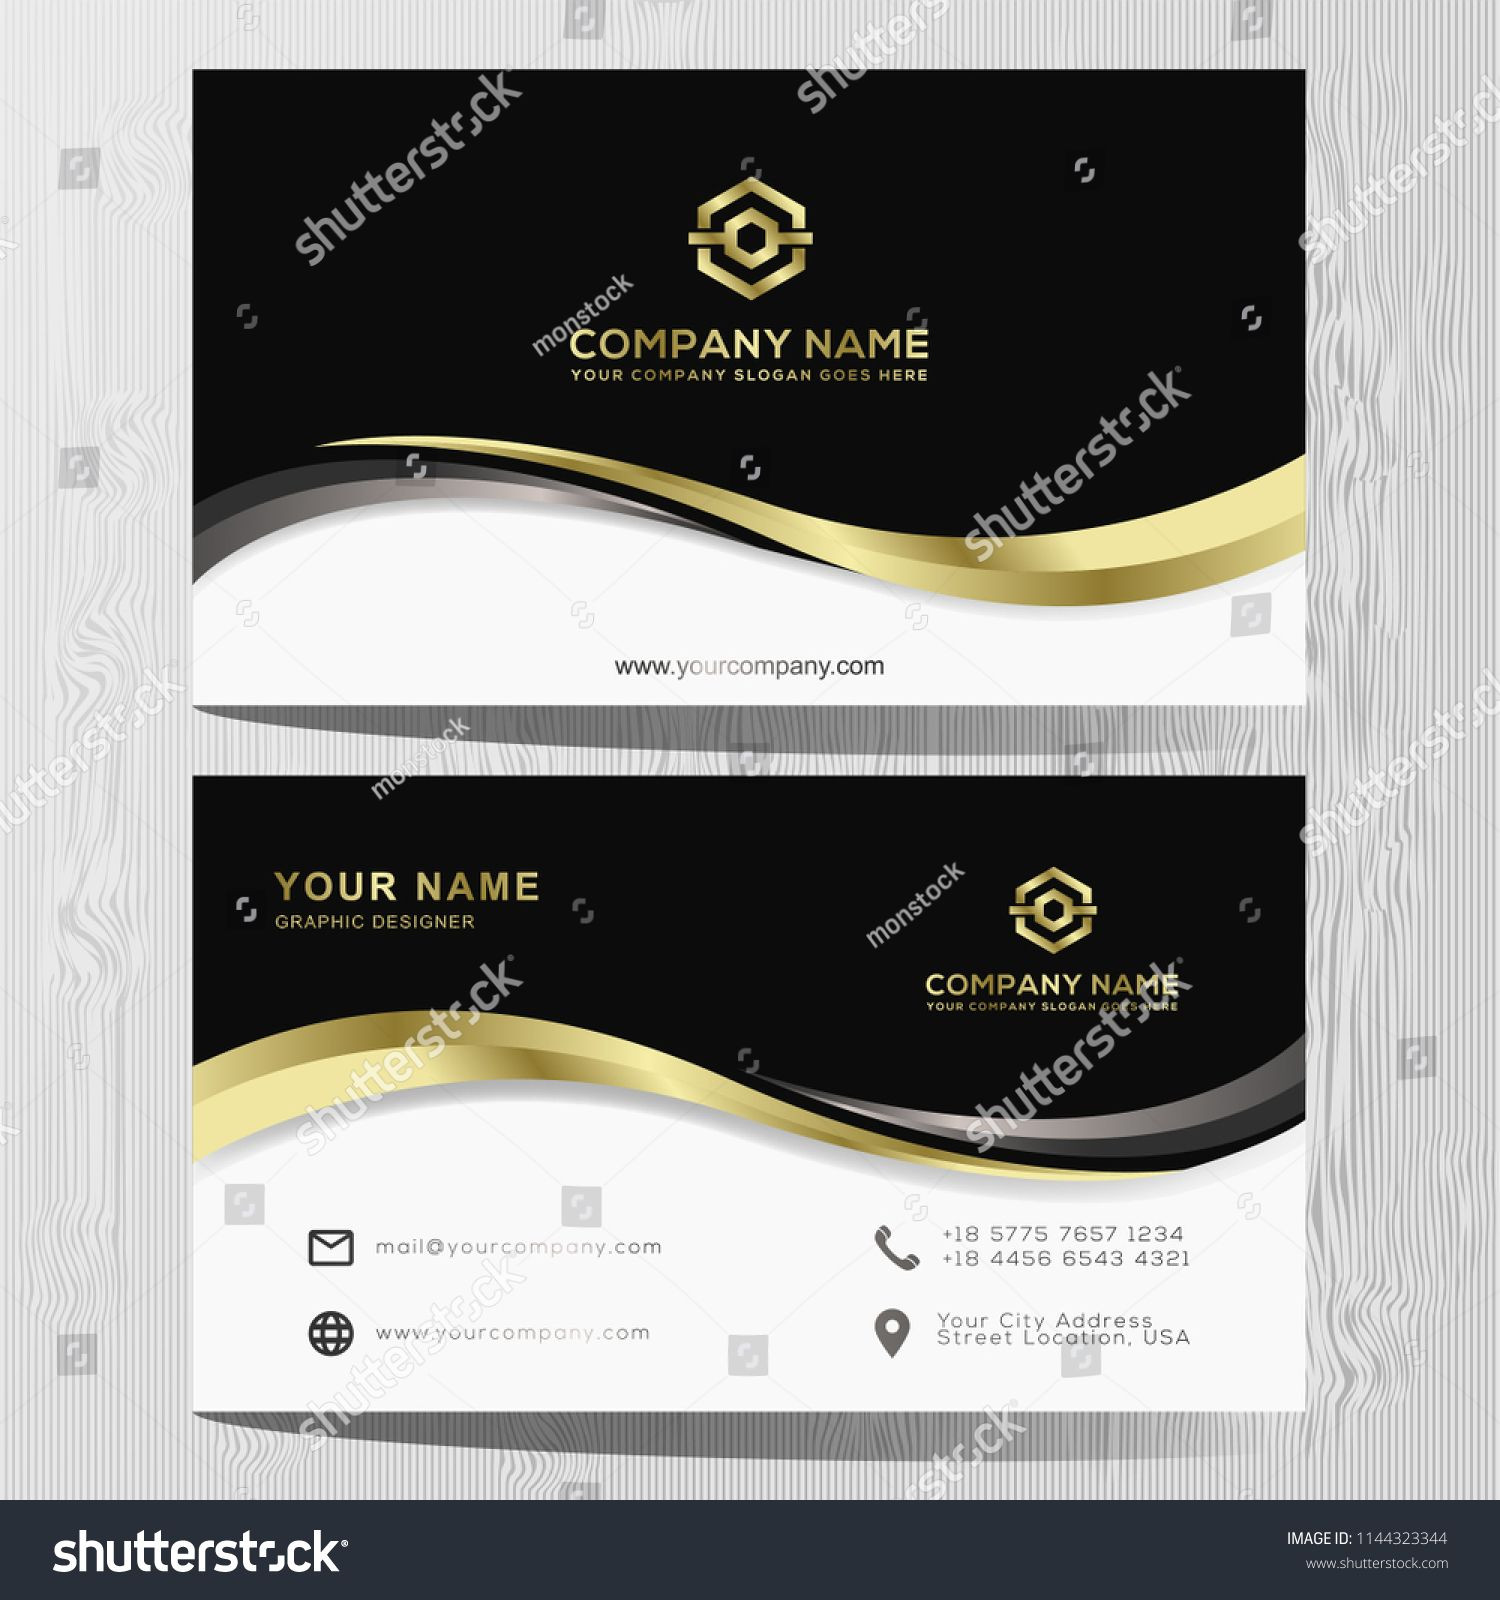 Luxury and Elegant Black Gold Business Cards Template On Of the Office Business Card Template